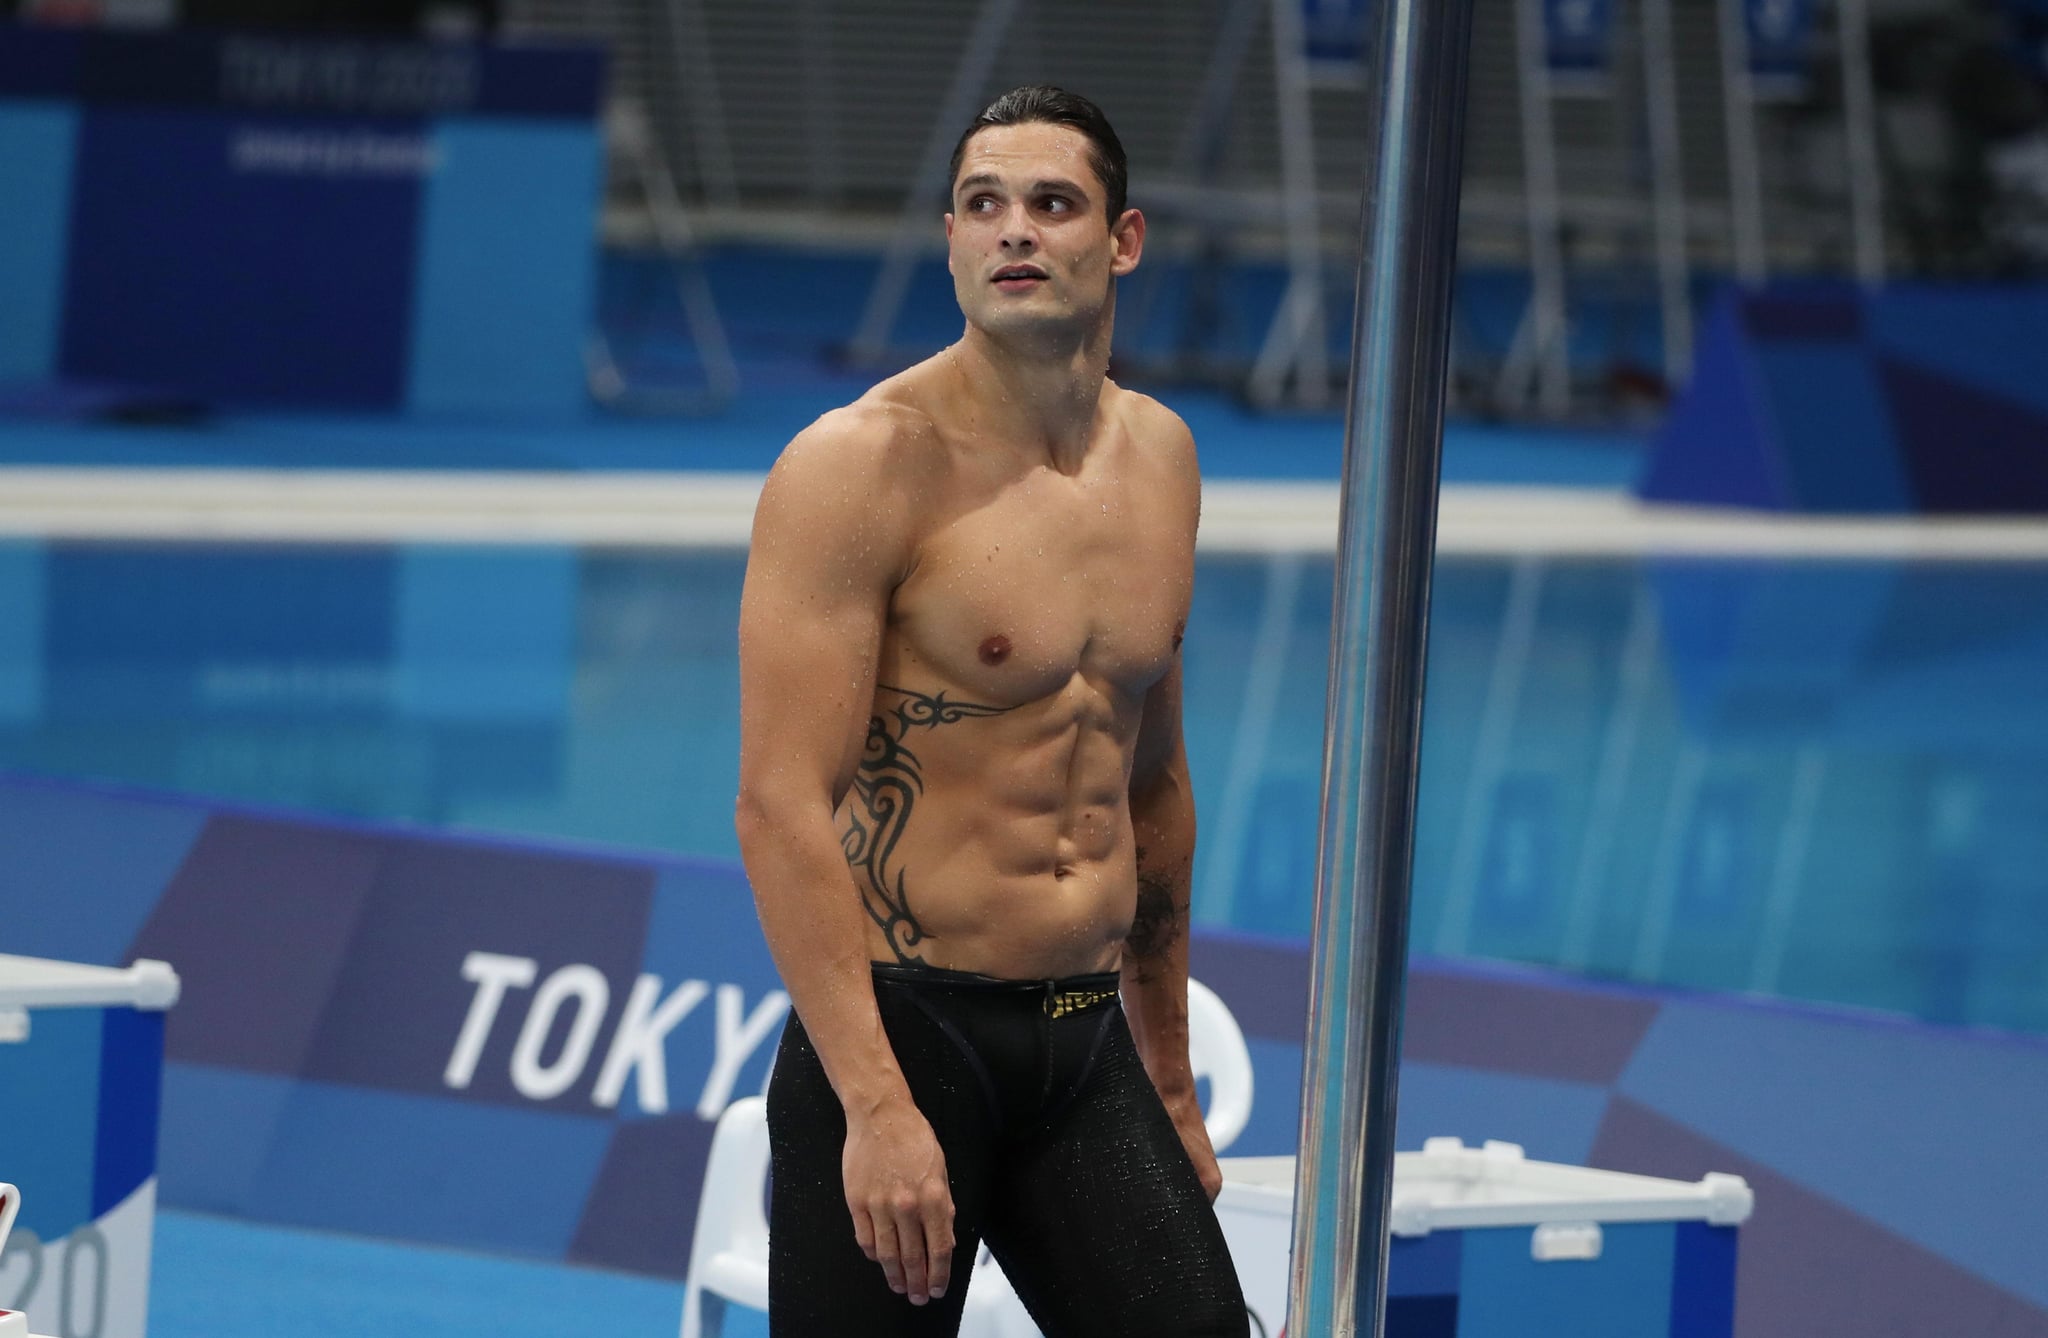 TOKYO, JAPAN - AUGUST 01: Florent Manaudou of Team France celebrate his second place in men's 50m freestyle final on day nine of the Tokyo 2020 Olympic Games at Tokyo Aquatics Centre on August 01, 2021 in Tokyo, Japan. (Photo by Xavier Laine/Getty Images)